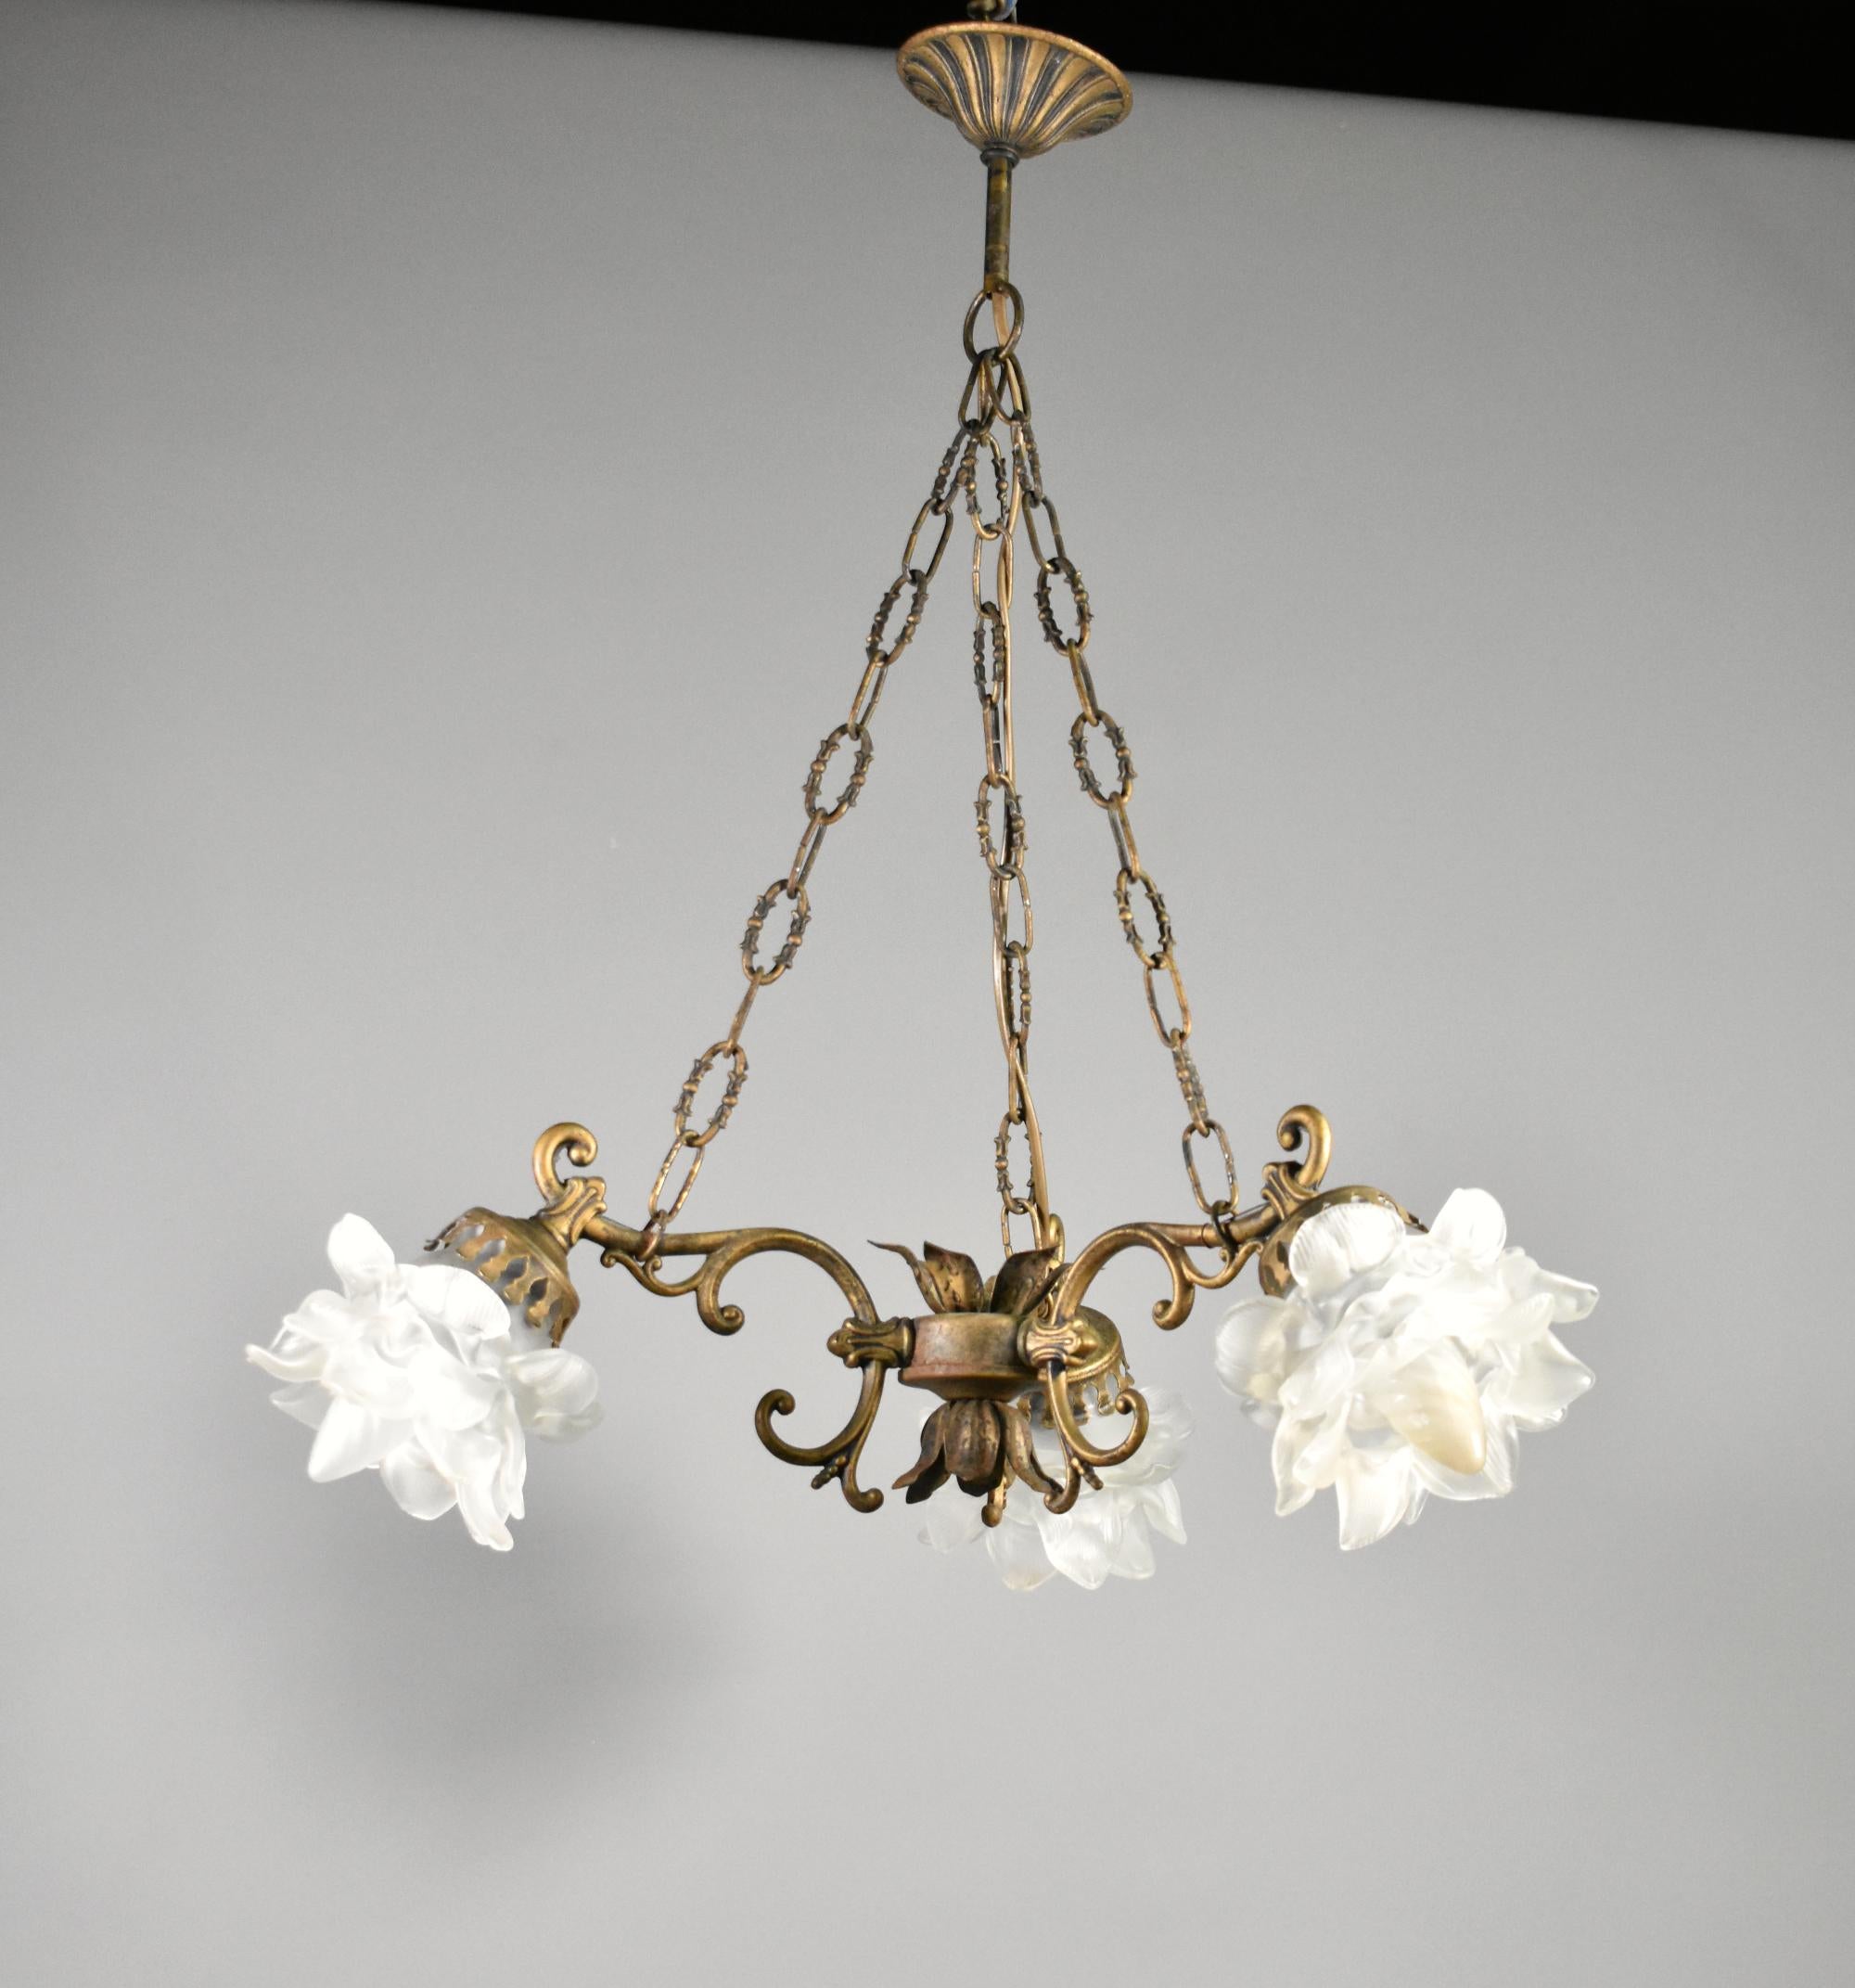 French Mid Century Ceiling Light with Three Floral Shades
 
This delightful French Three Light bronzed ceiling light features three original floral semi-opaque glass shades.
 
The outstretched arms have C-scroll decoration and are joined in the